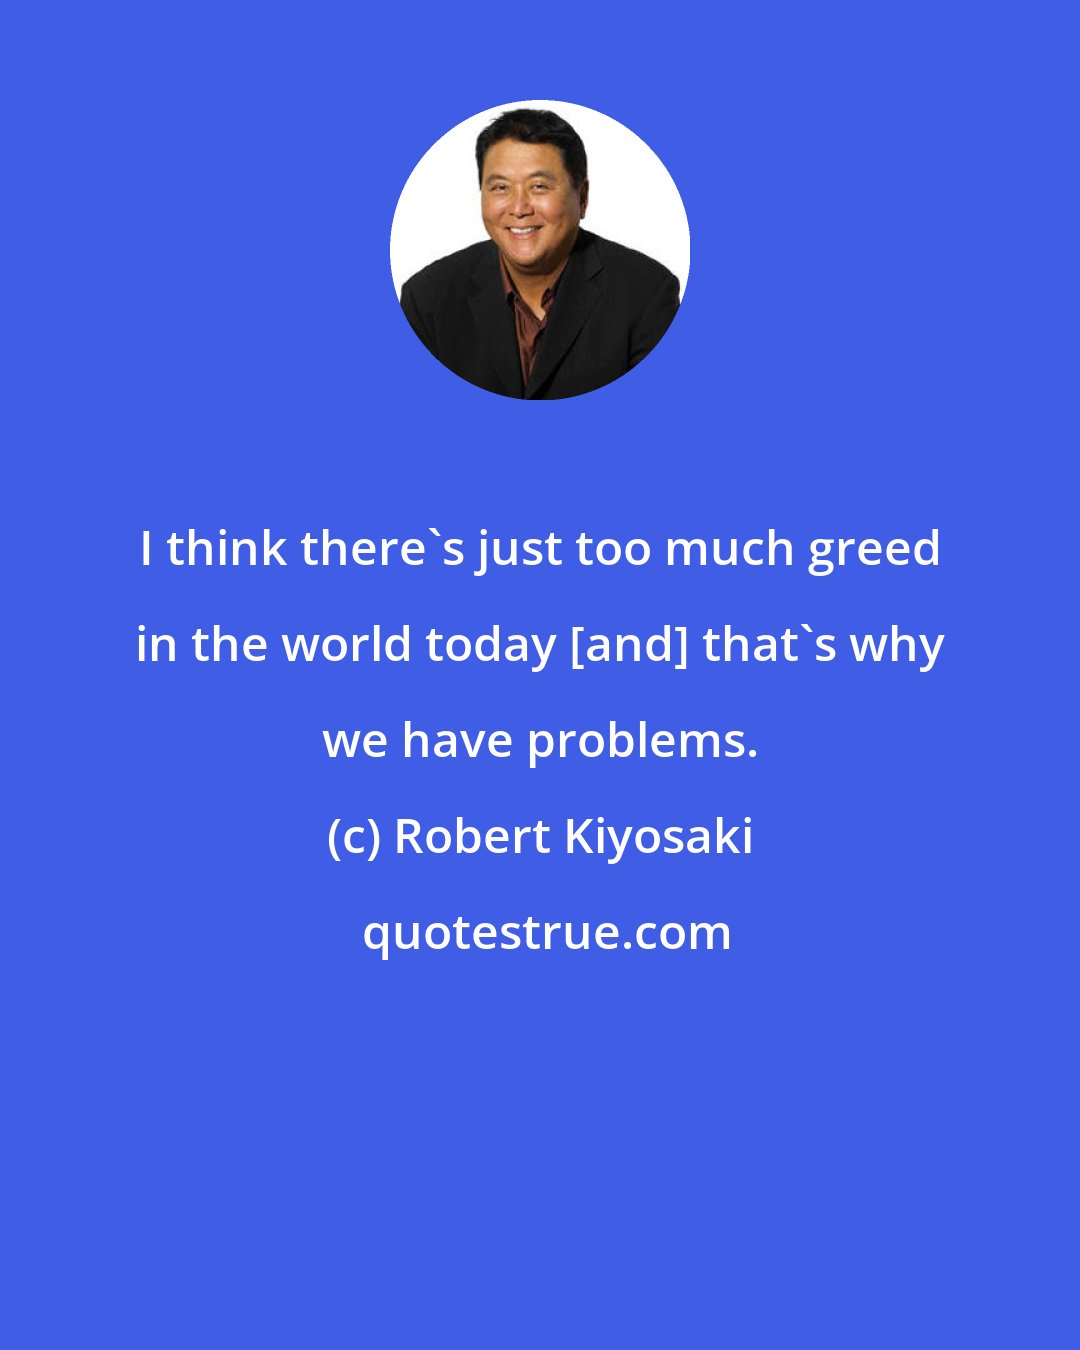 Robert Kiyosaki: I think there's just too much greed in the world today [and] that's why we have problems.